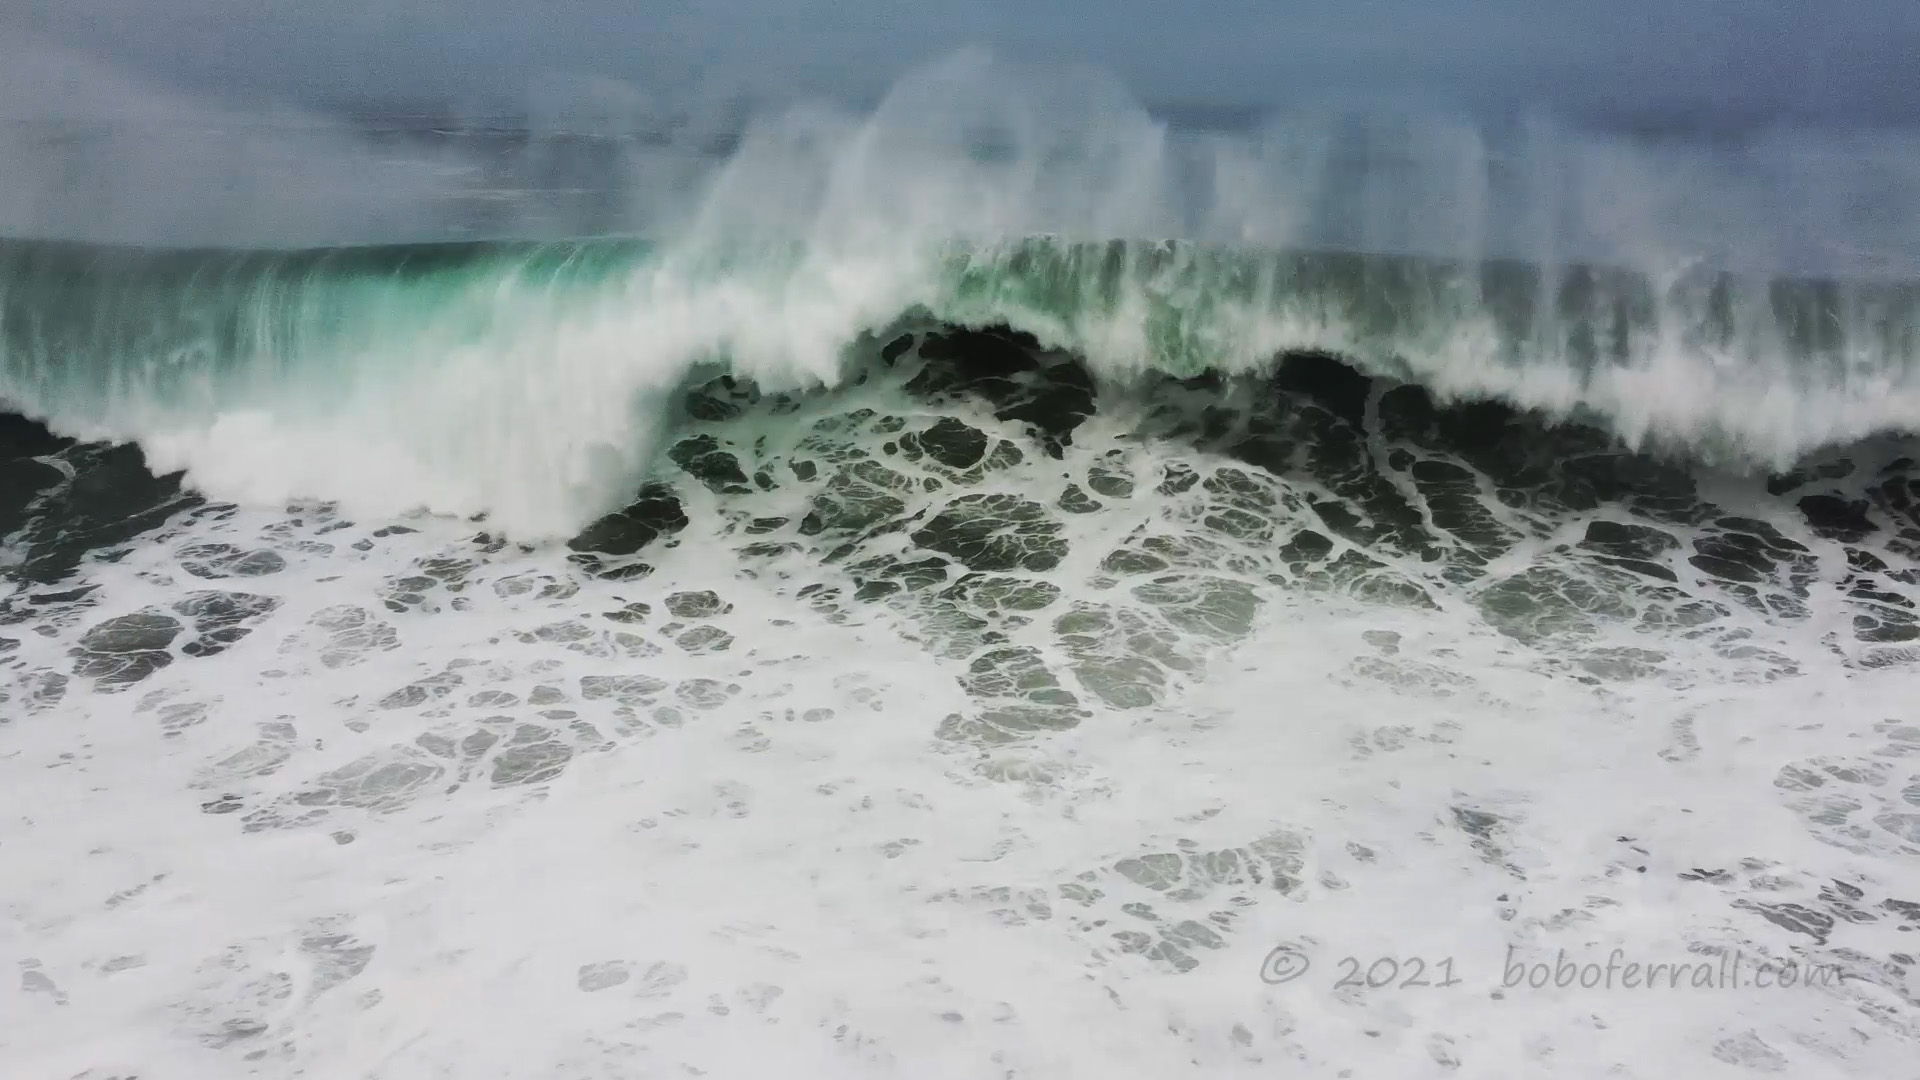 AM2-120, Super Nice Wave Here. Beautiful Pacific Ocean Wave From January 10th 2021 at Fort Bragg, Ca, USA By Robert OFerrall